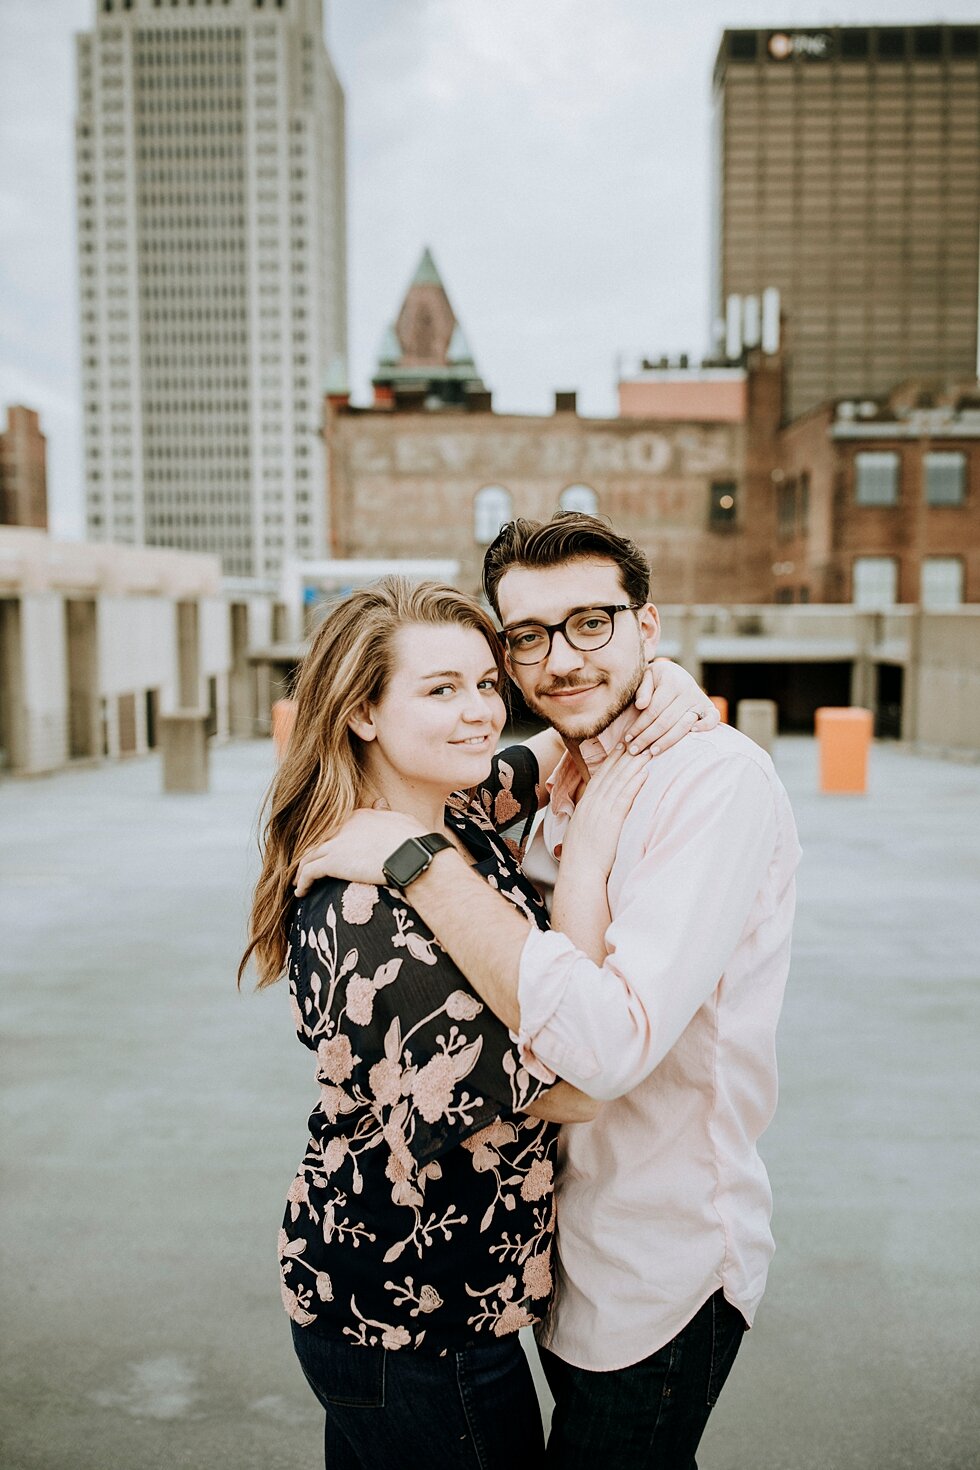  Smiling together this engaged couple celebrated their engagement with a rooftop engagement session and the Louisville skyline in the background. getting married outdoor session engaged couple together wedding preparation love excited stunning relati